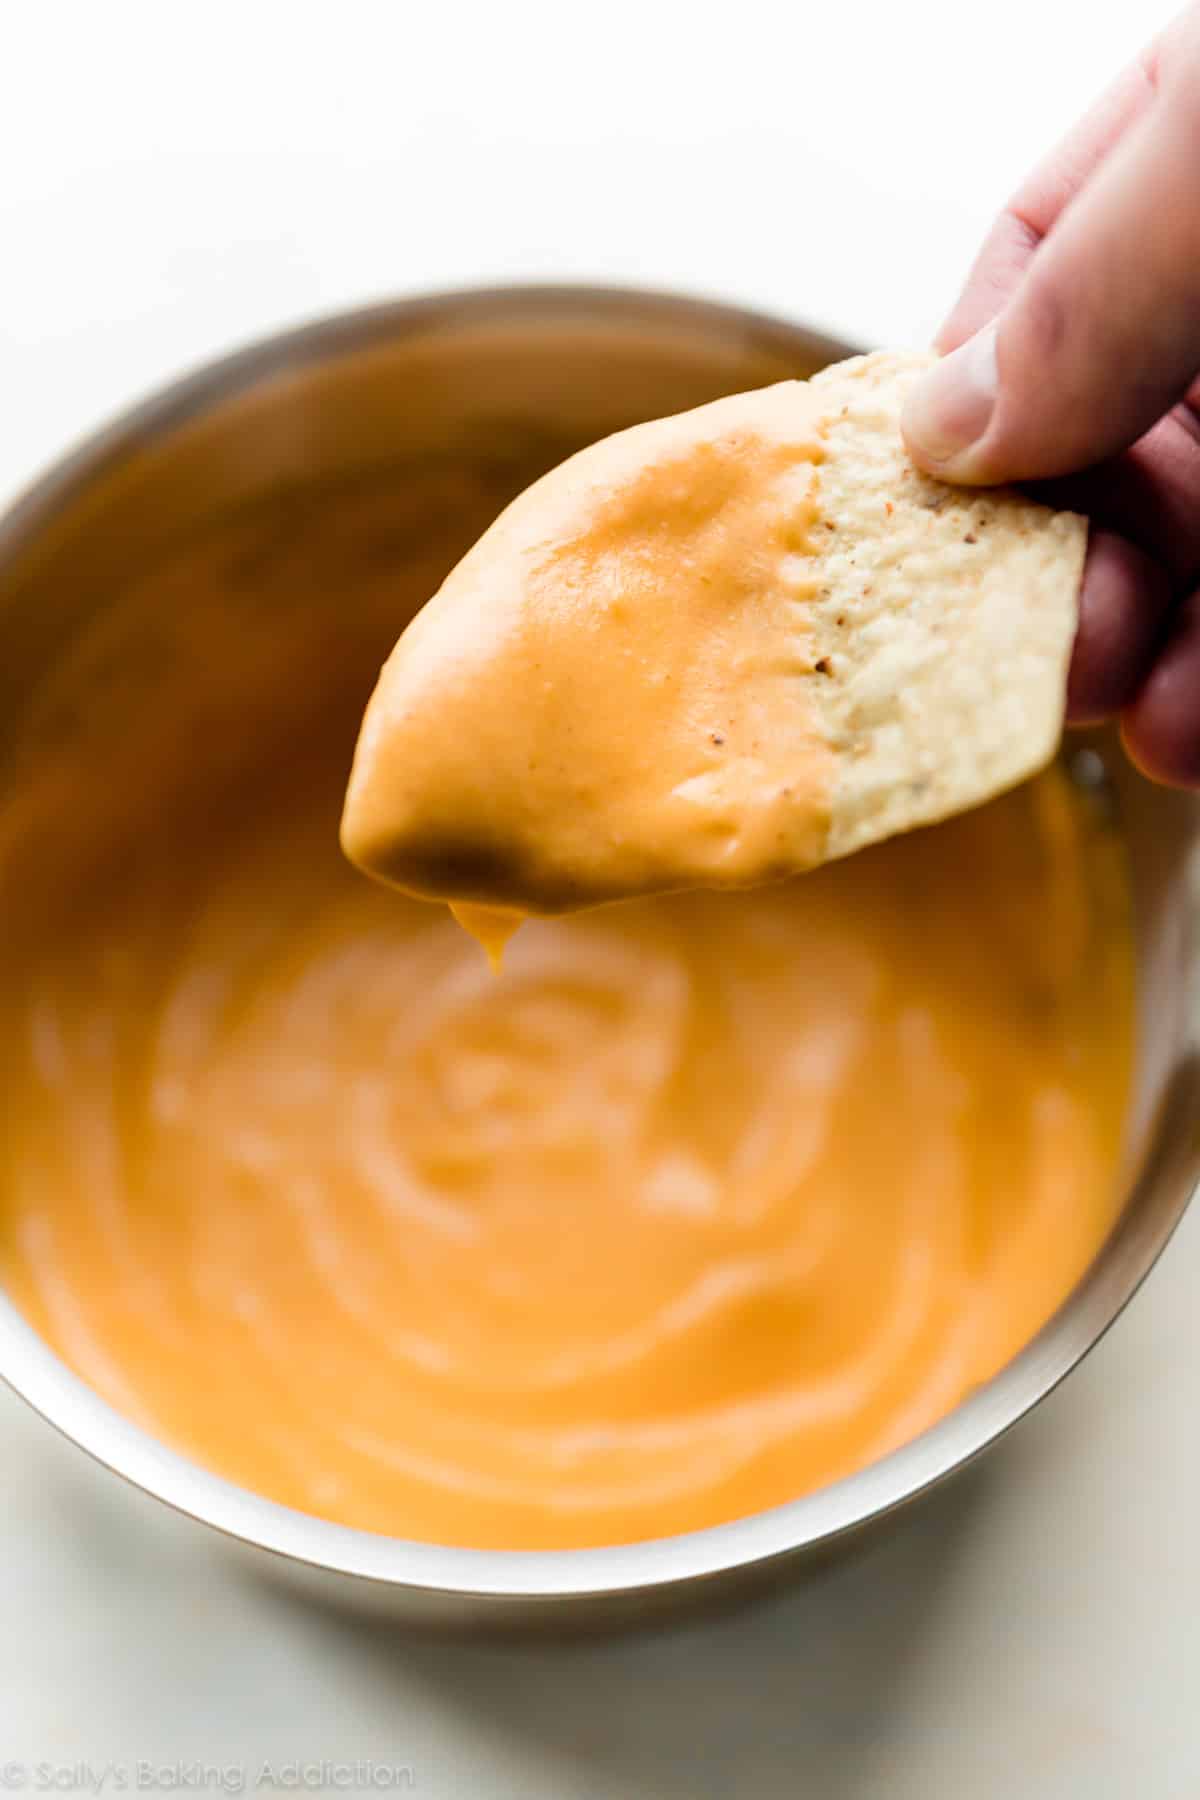 dipping a chip into bowl of nacho cheese sauce